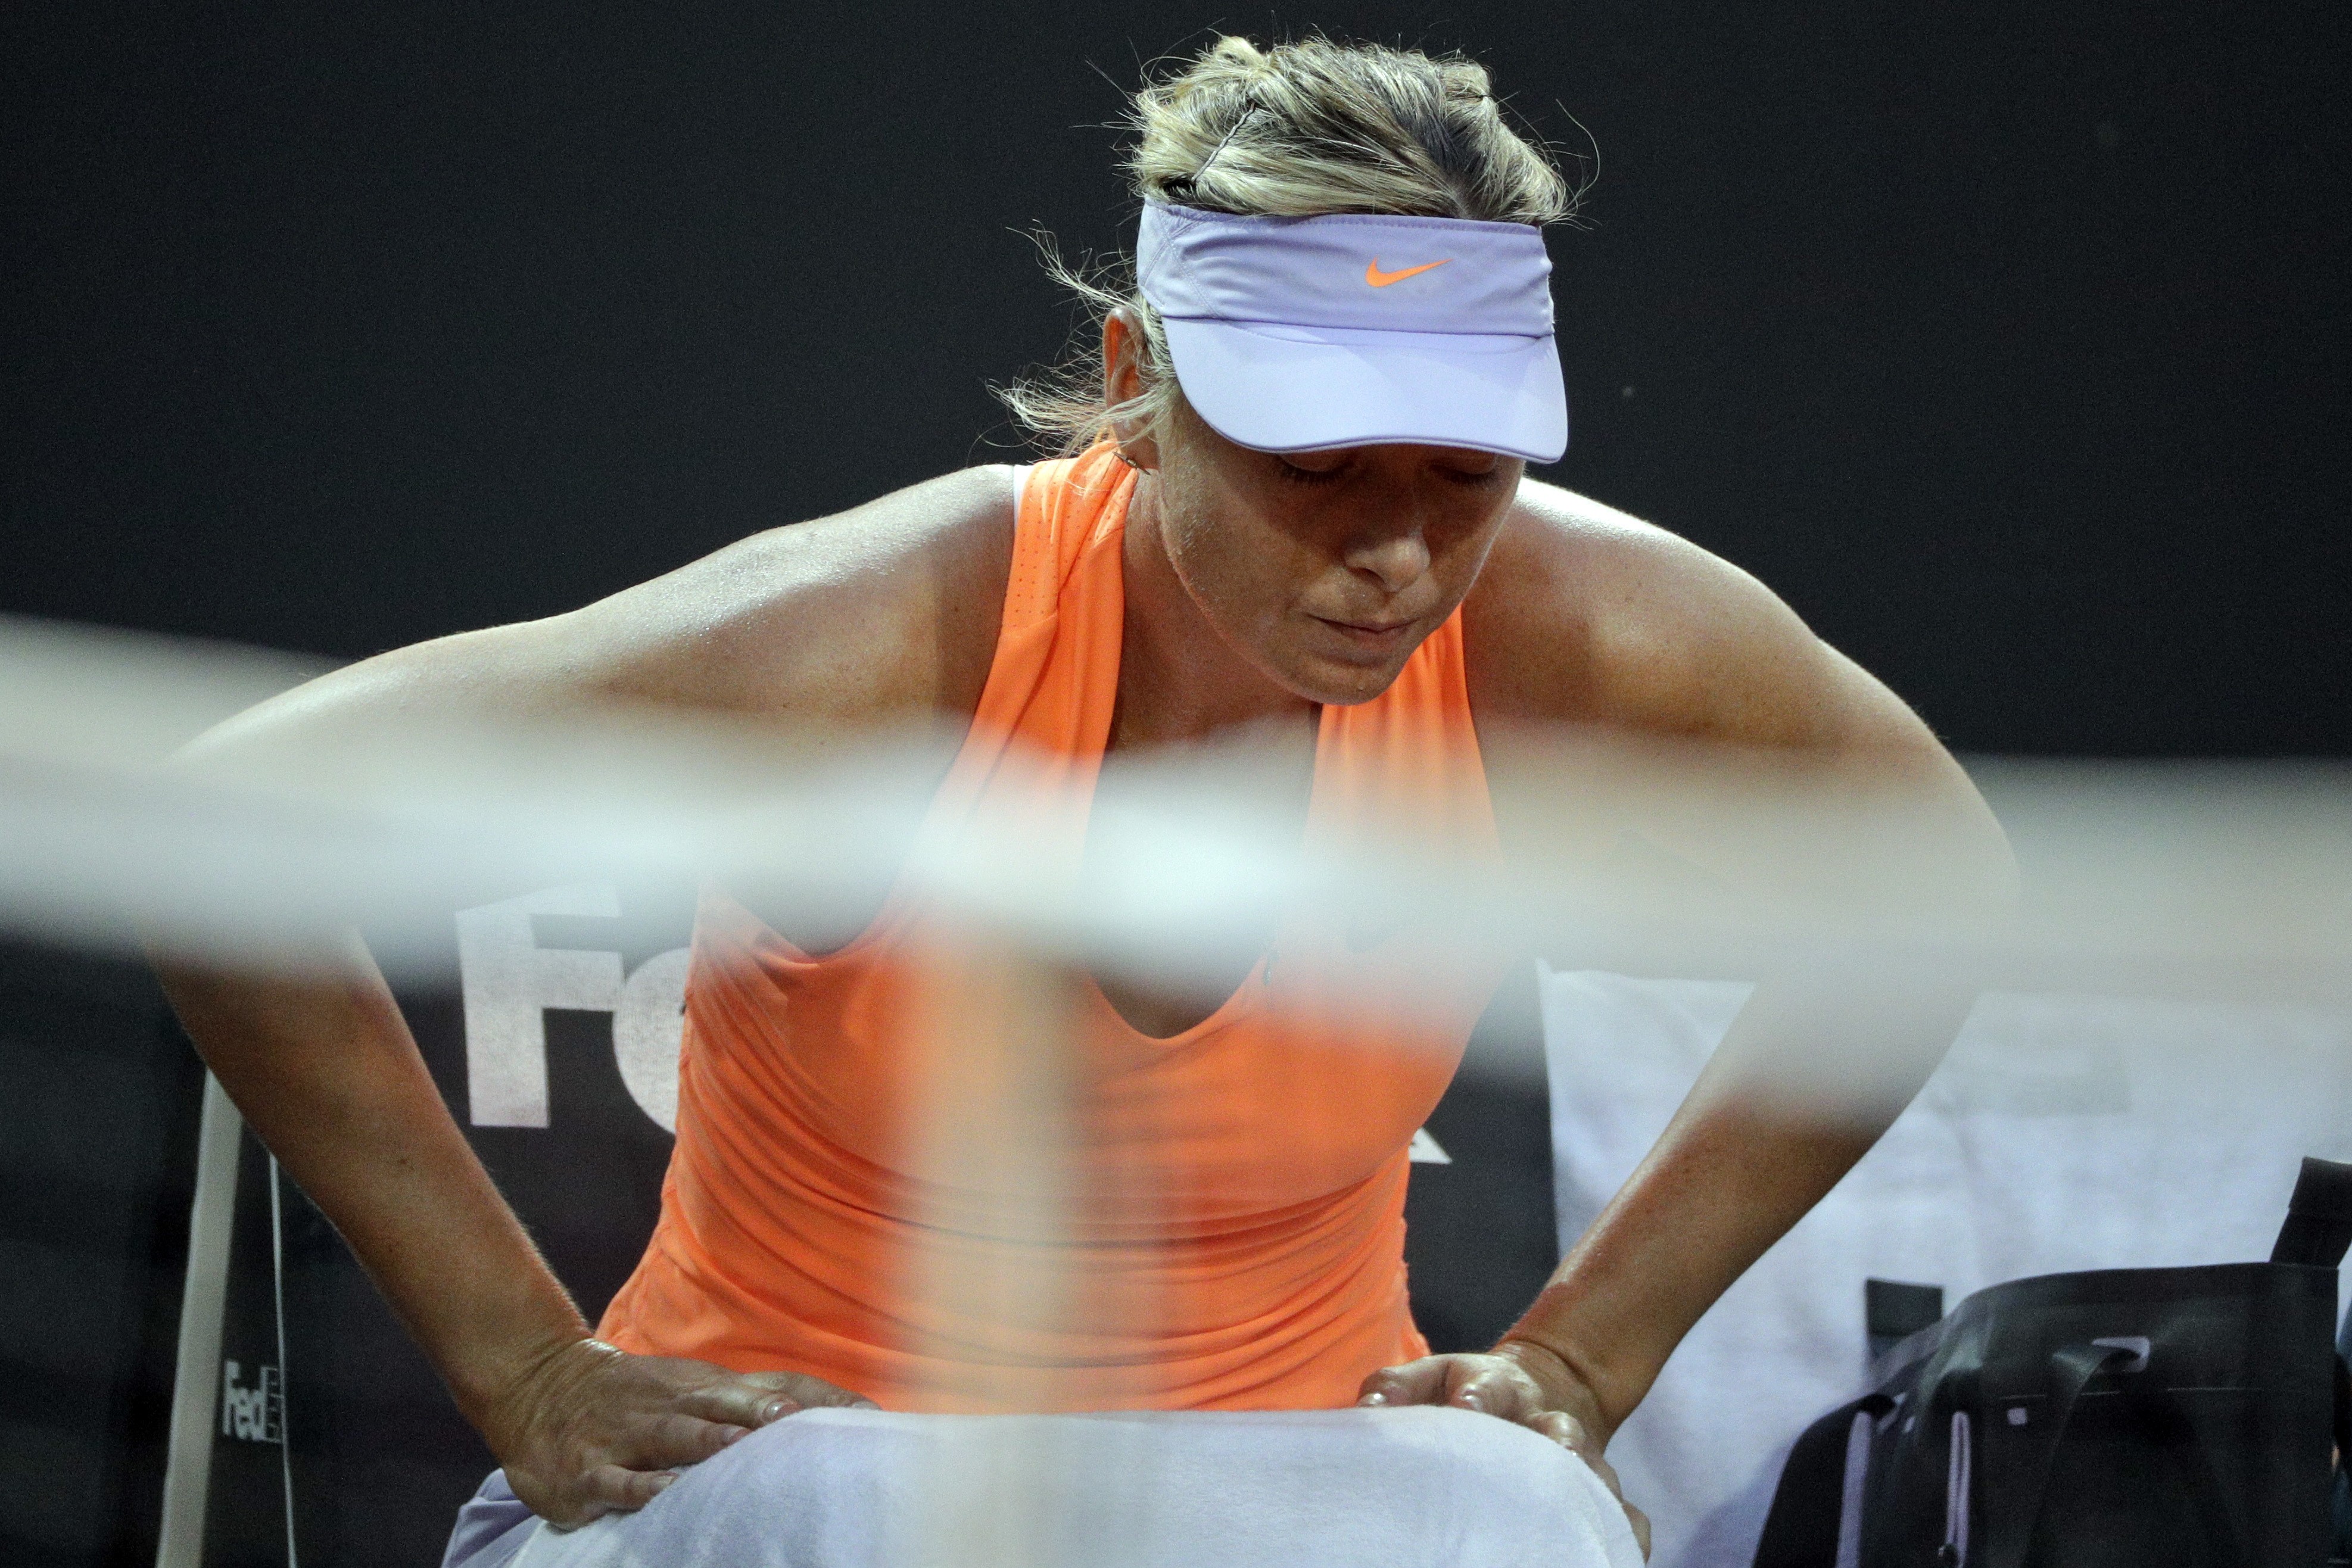 Maria Sharapova is trying to piece her career together after serving a doping ban. So far she has received little sympathy from those in the sport. Photo: AP